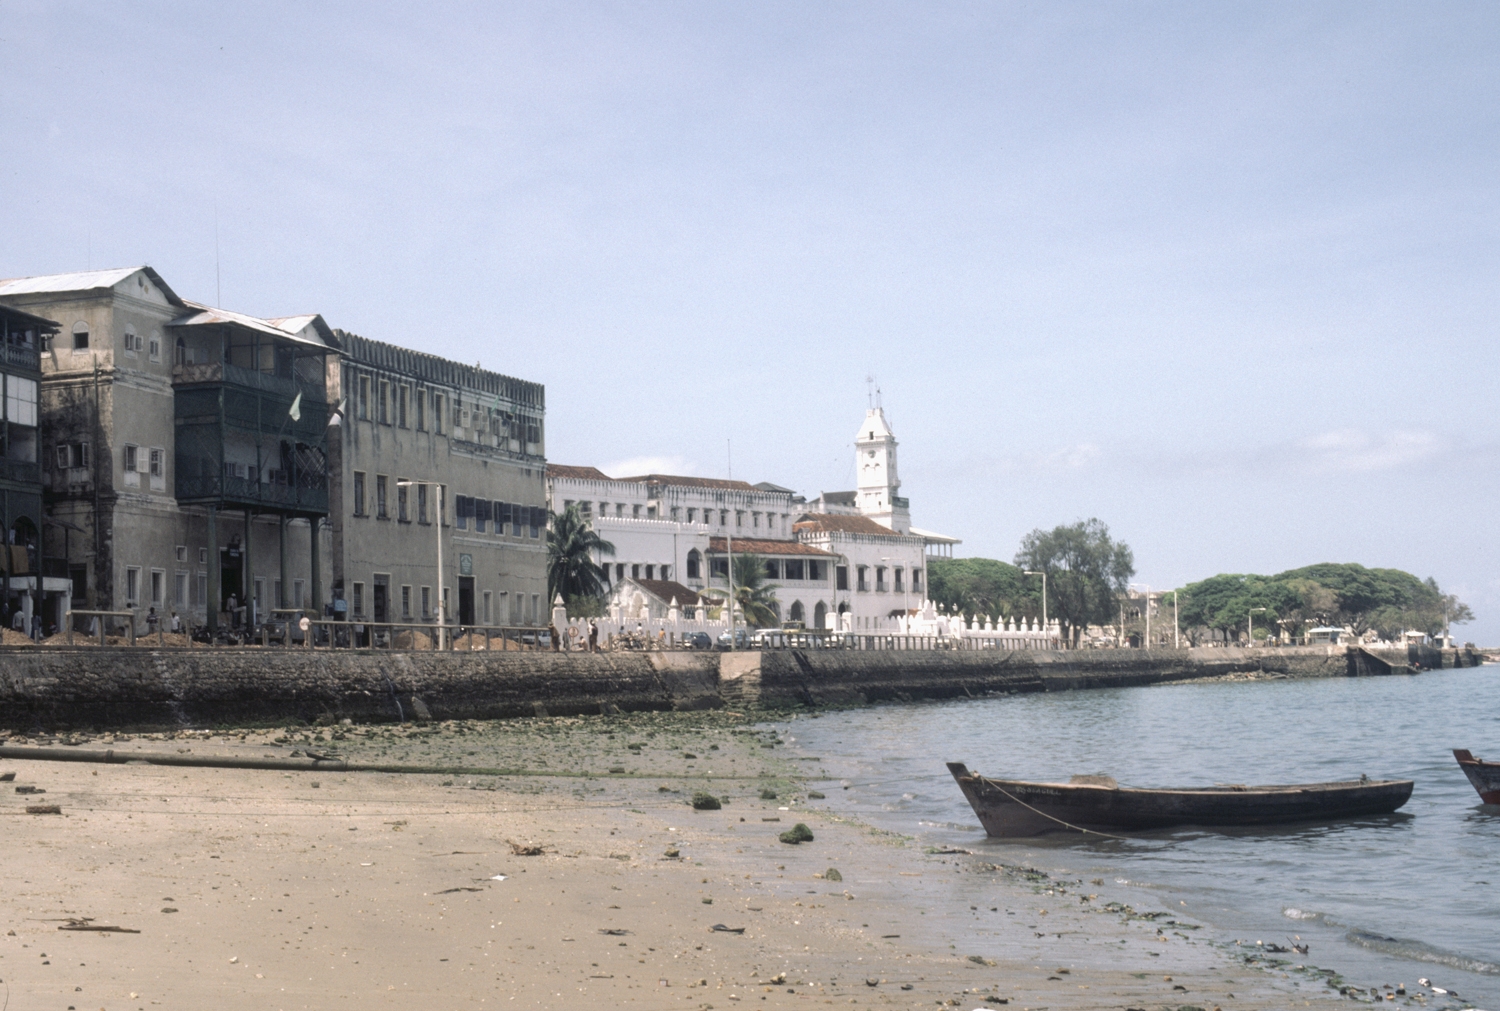 Waterfront view, looking west, Sultan's Palace partially visible in distance, with House of Wonders clock tower. The pipe on the beach is a sewage pipe leading to the sea.